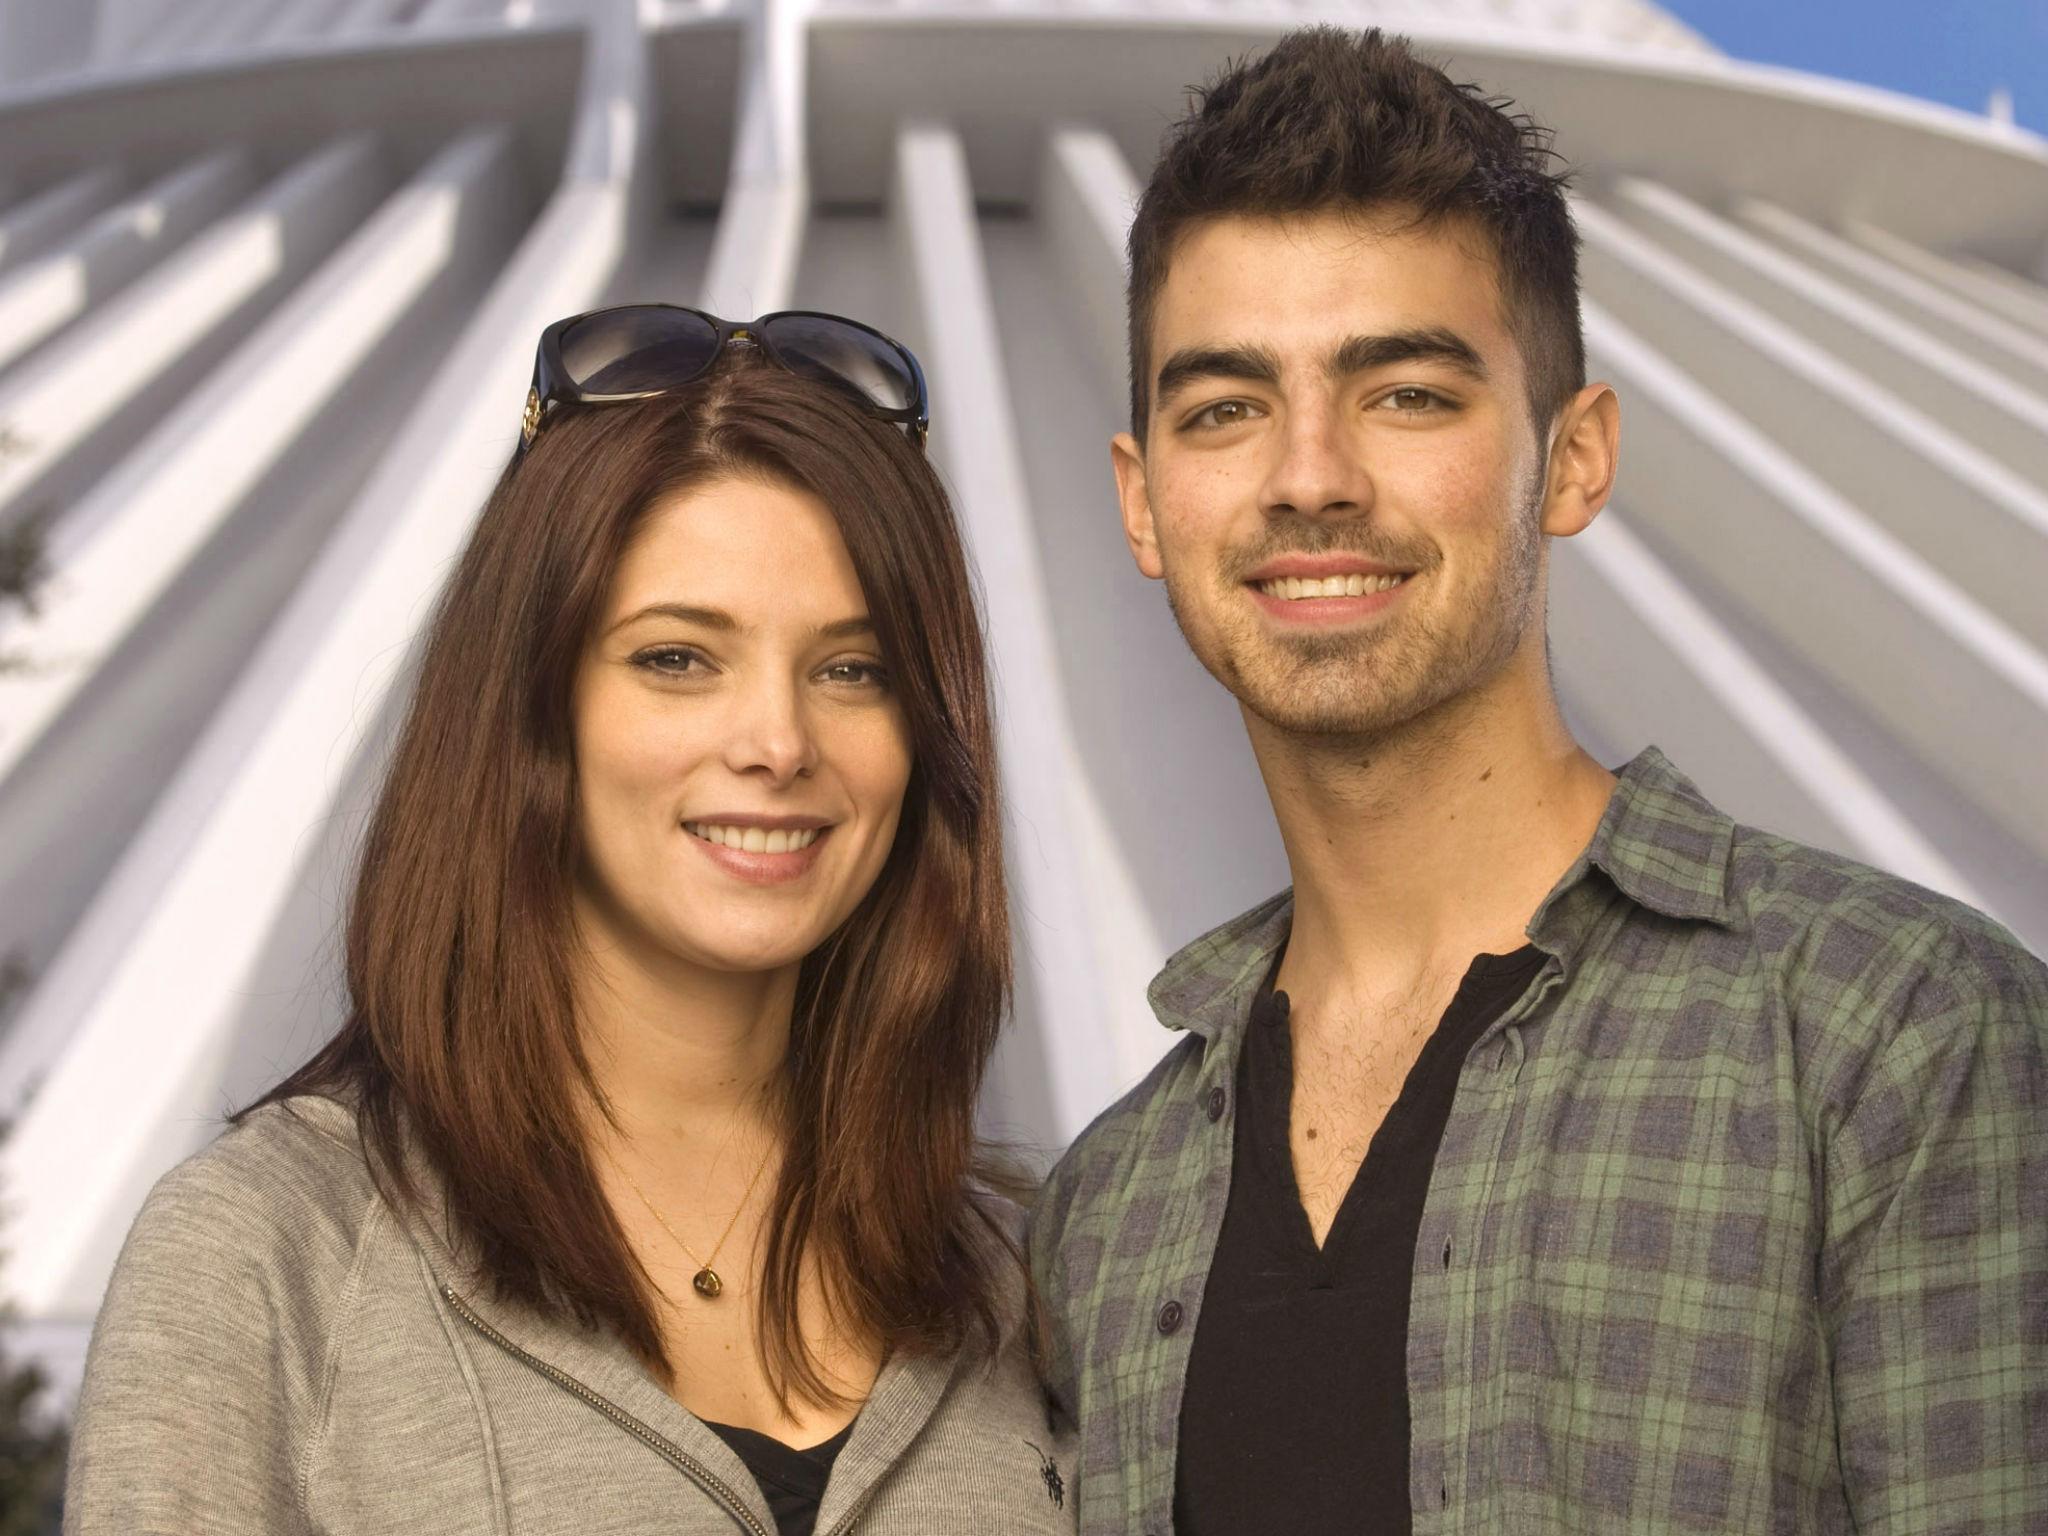 Ashley Greene signals she isnt pleased with Joe Jonas for saying he lost his virginity to her The Independent The Independent